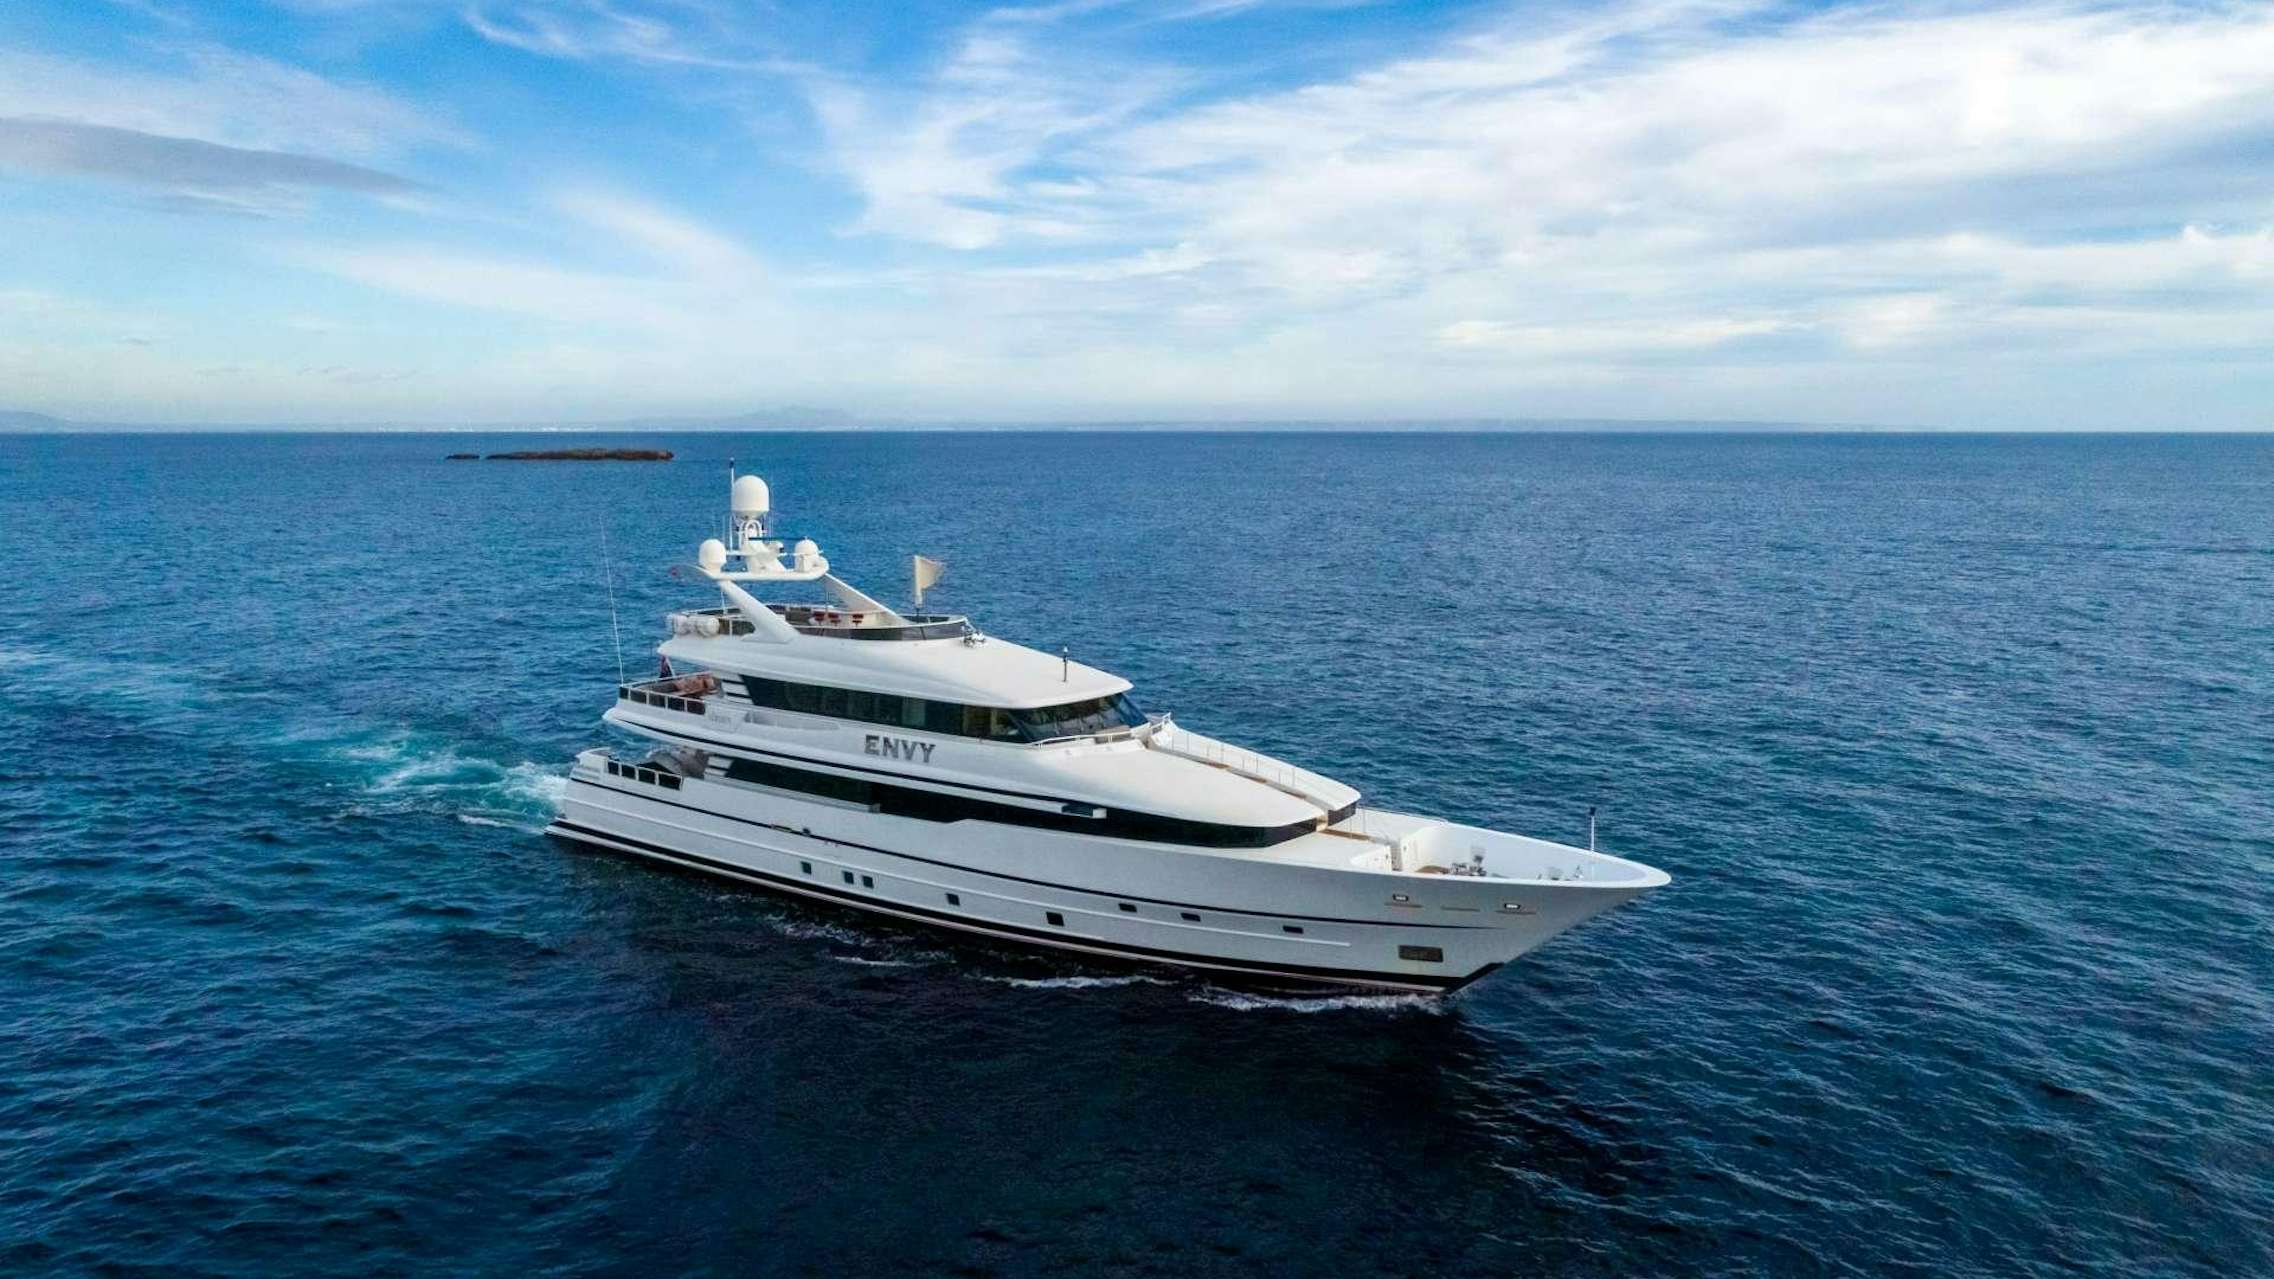 Watch Video for ENVY Yacht for Charter